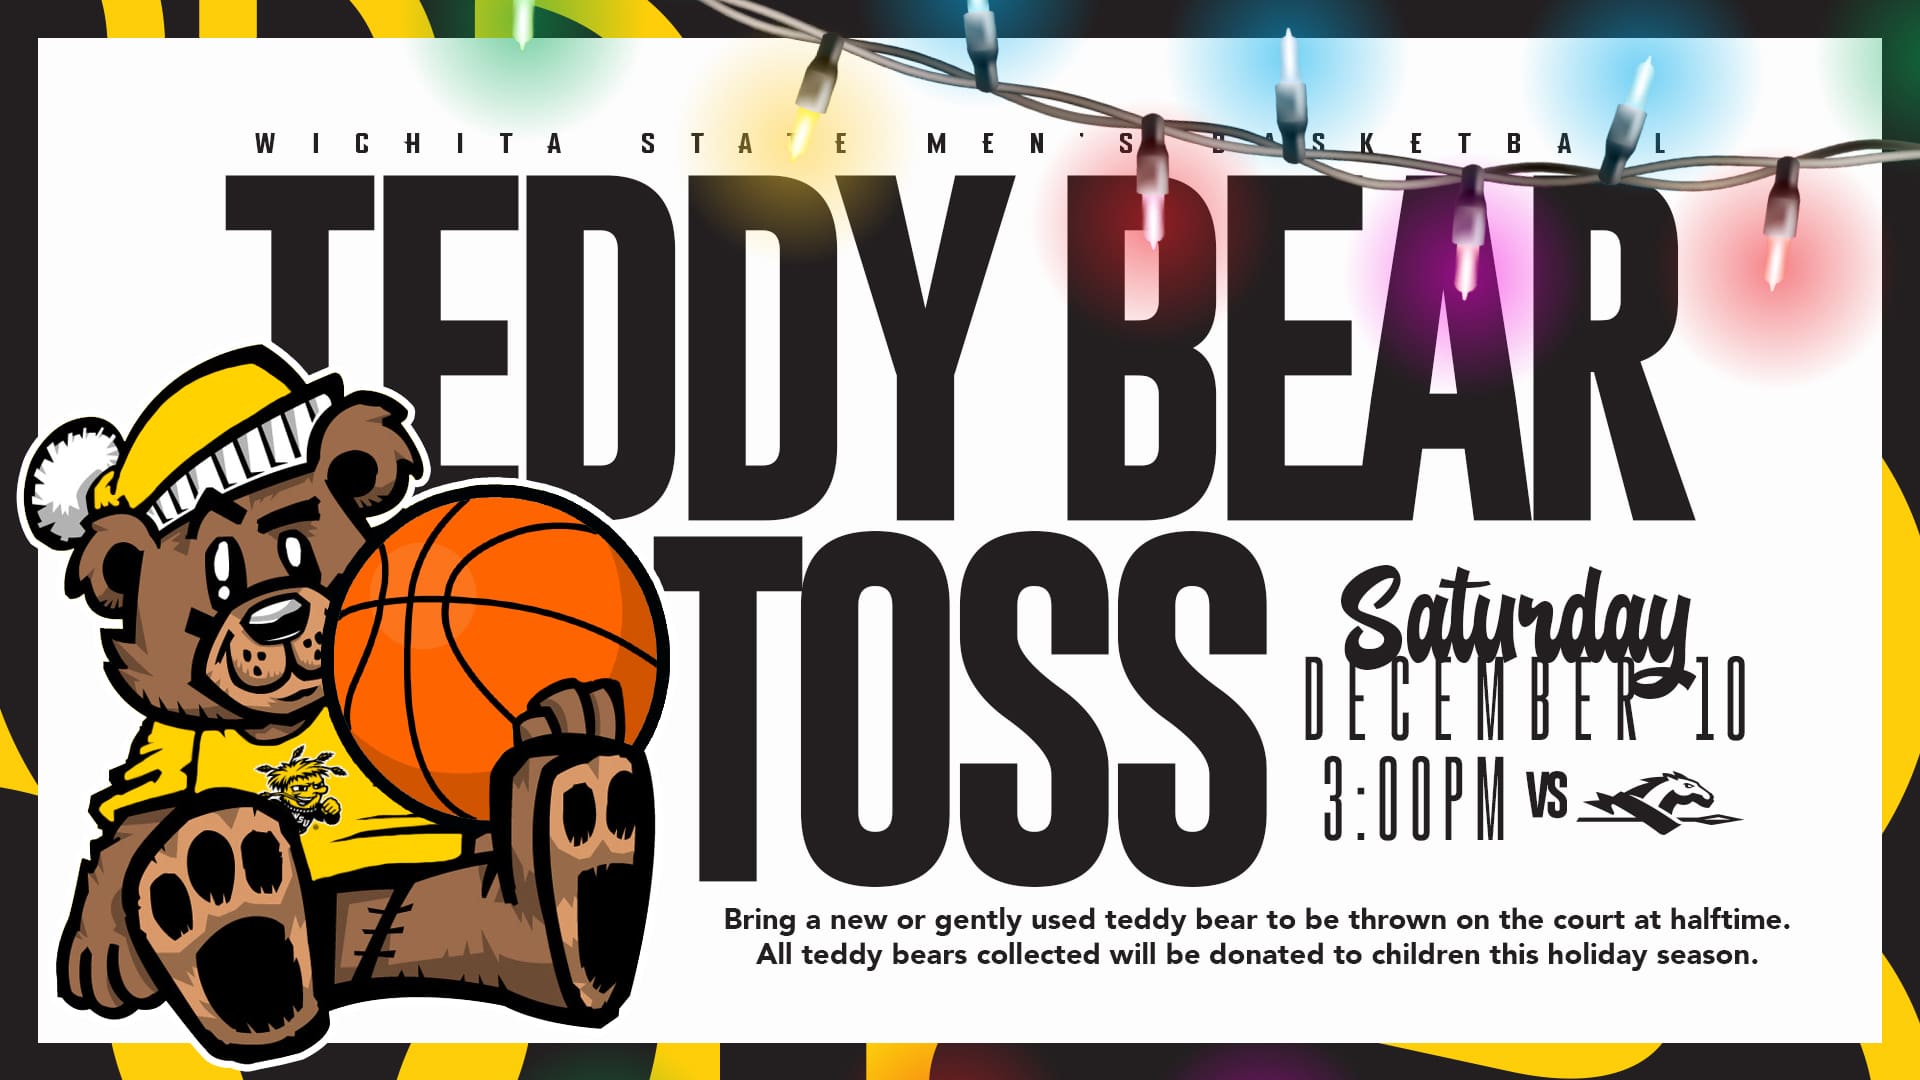 The 2nd Annual Teddy Bear Toss is this Saturday, Dec. 10th at 3pm at the WSU Men's Basketball Game vs Longwood. Bring a new or gently used stuffed animal to throw onto the court at halftime. All teddy bears collected will be donated to local children this holiday season.